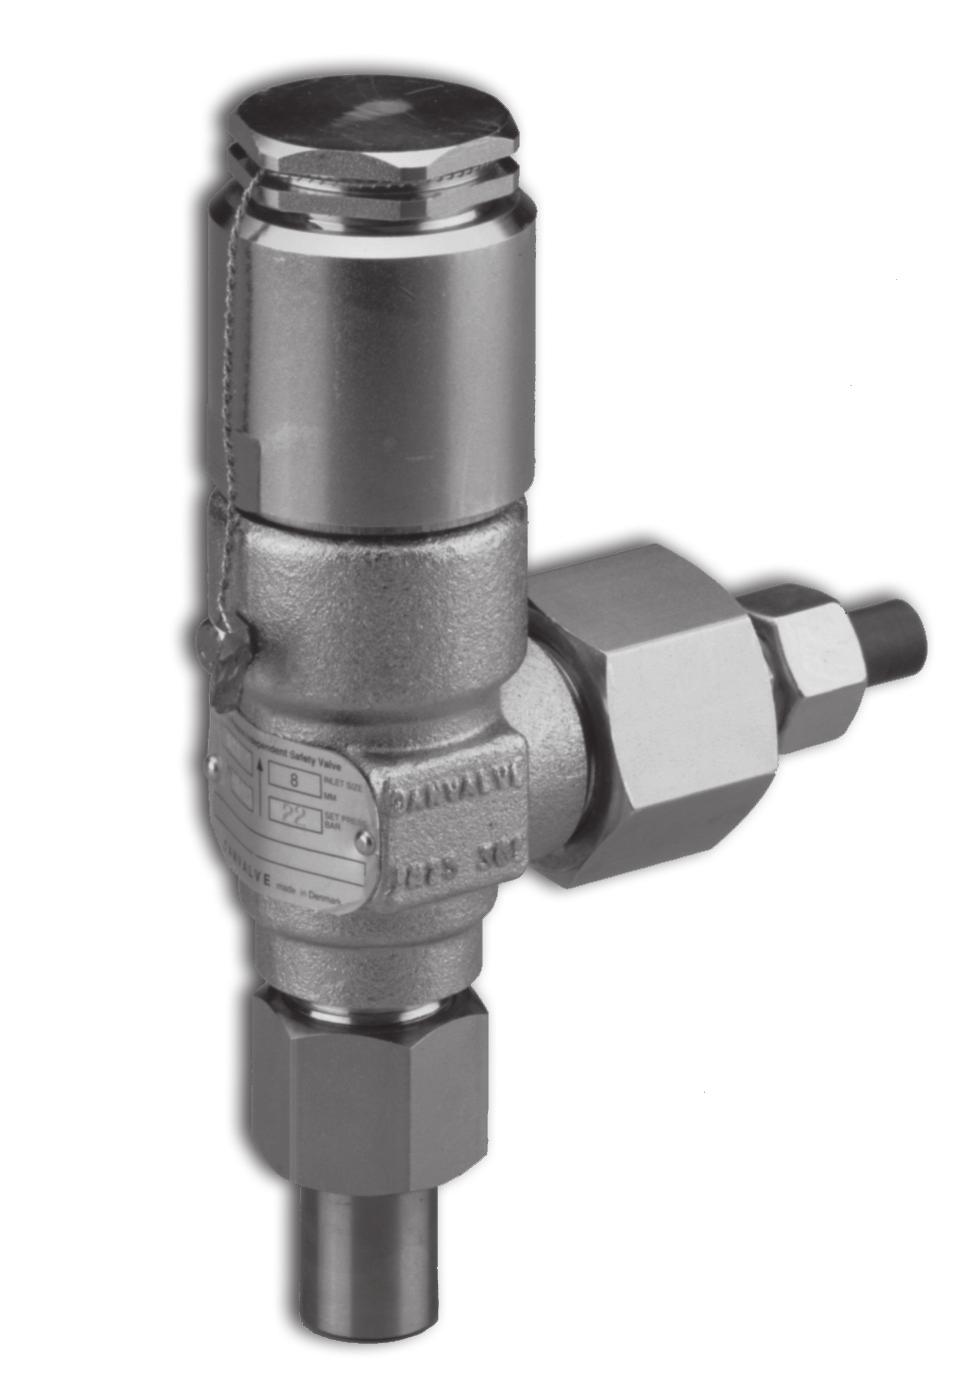 Introduction BSV is a standard, back pressure independent safety relief valve, especially designed for protection of small components against excessive pressure and as a pilot valve for the pilot